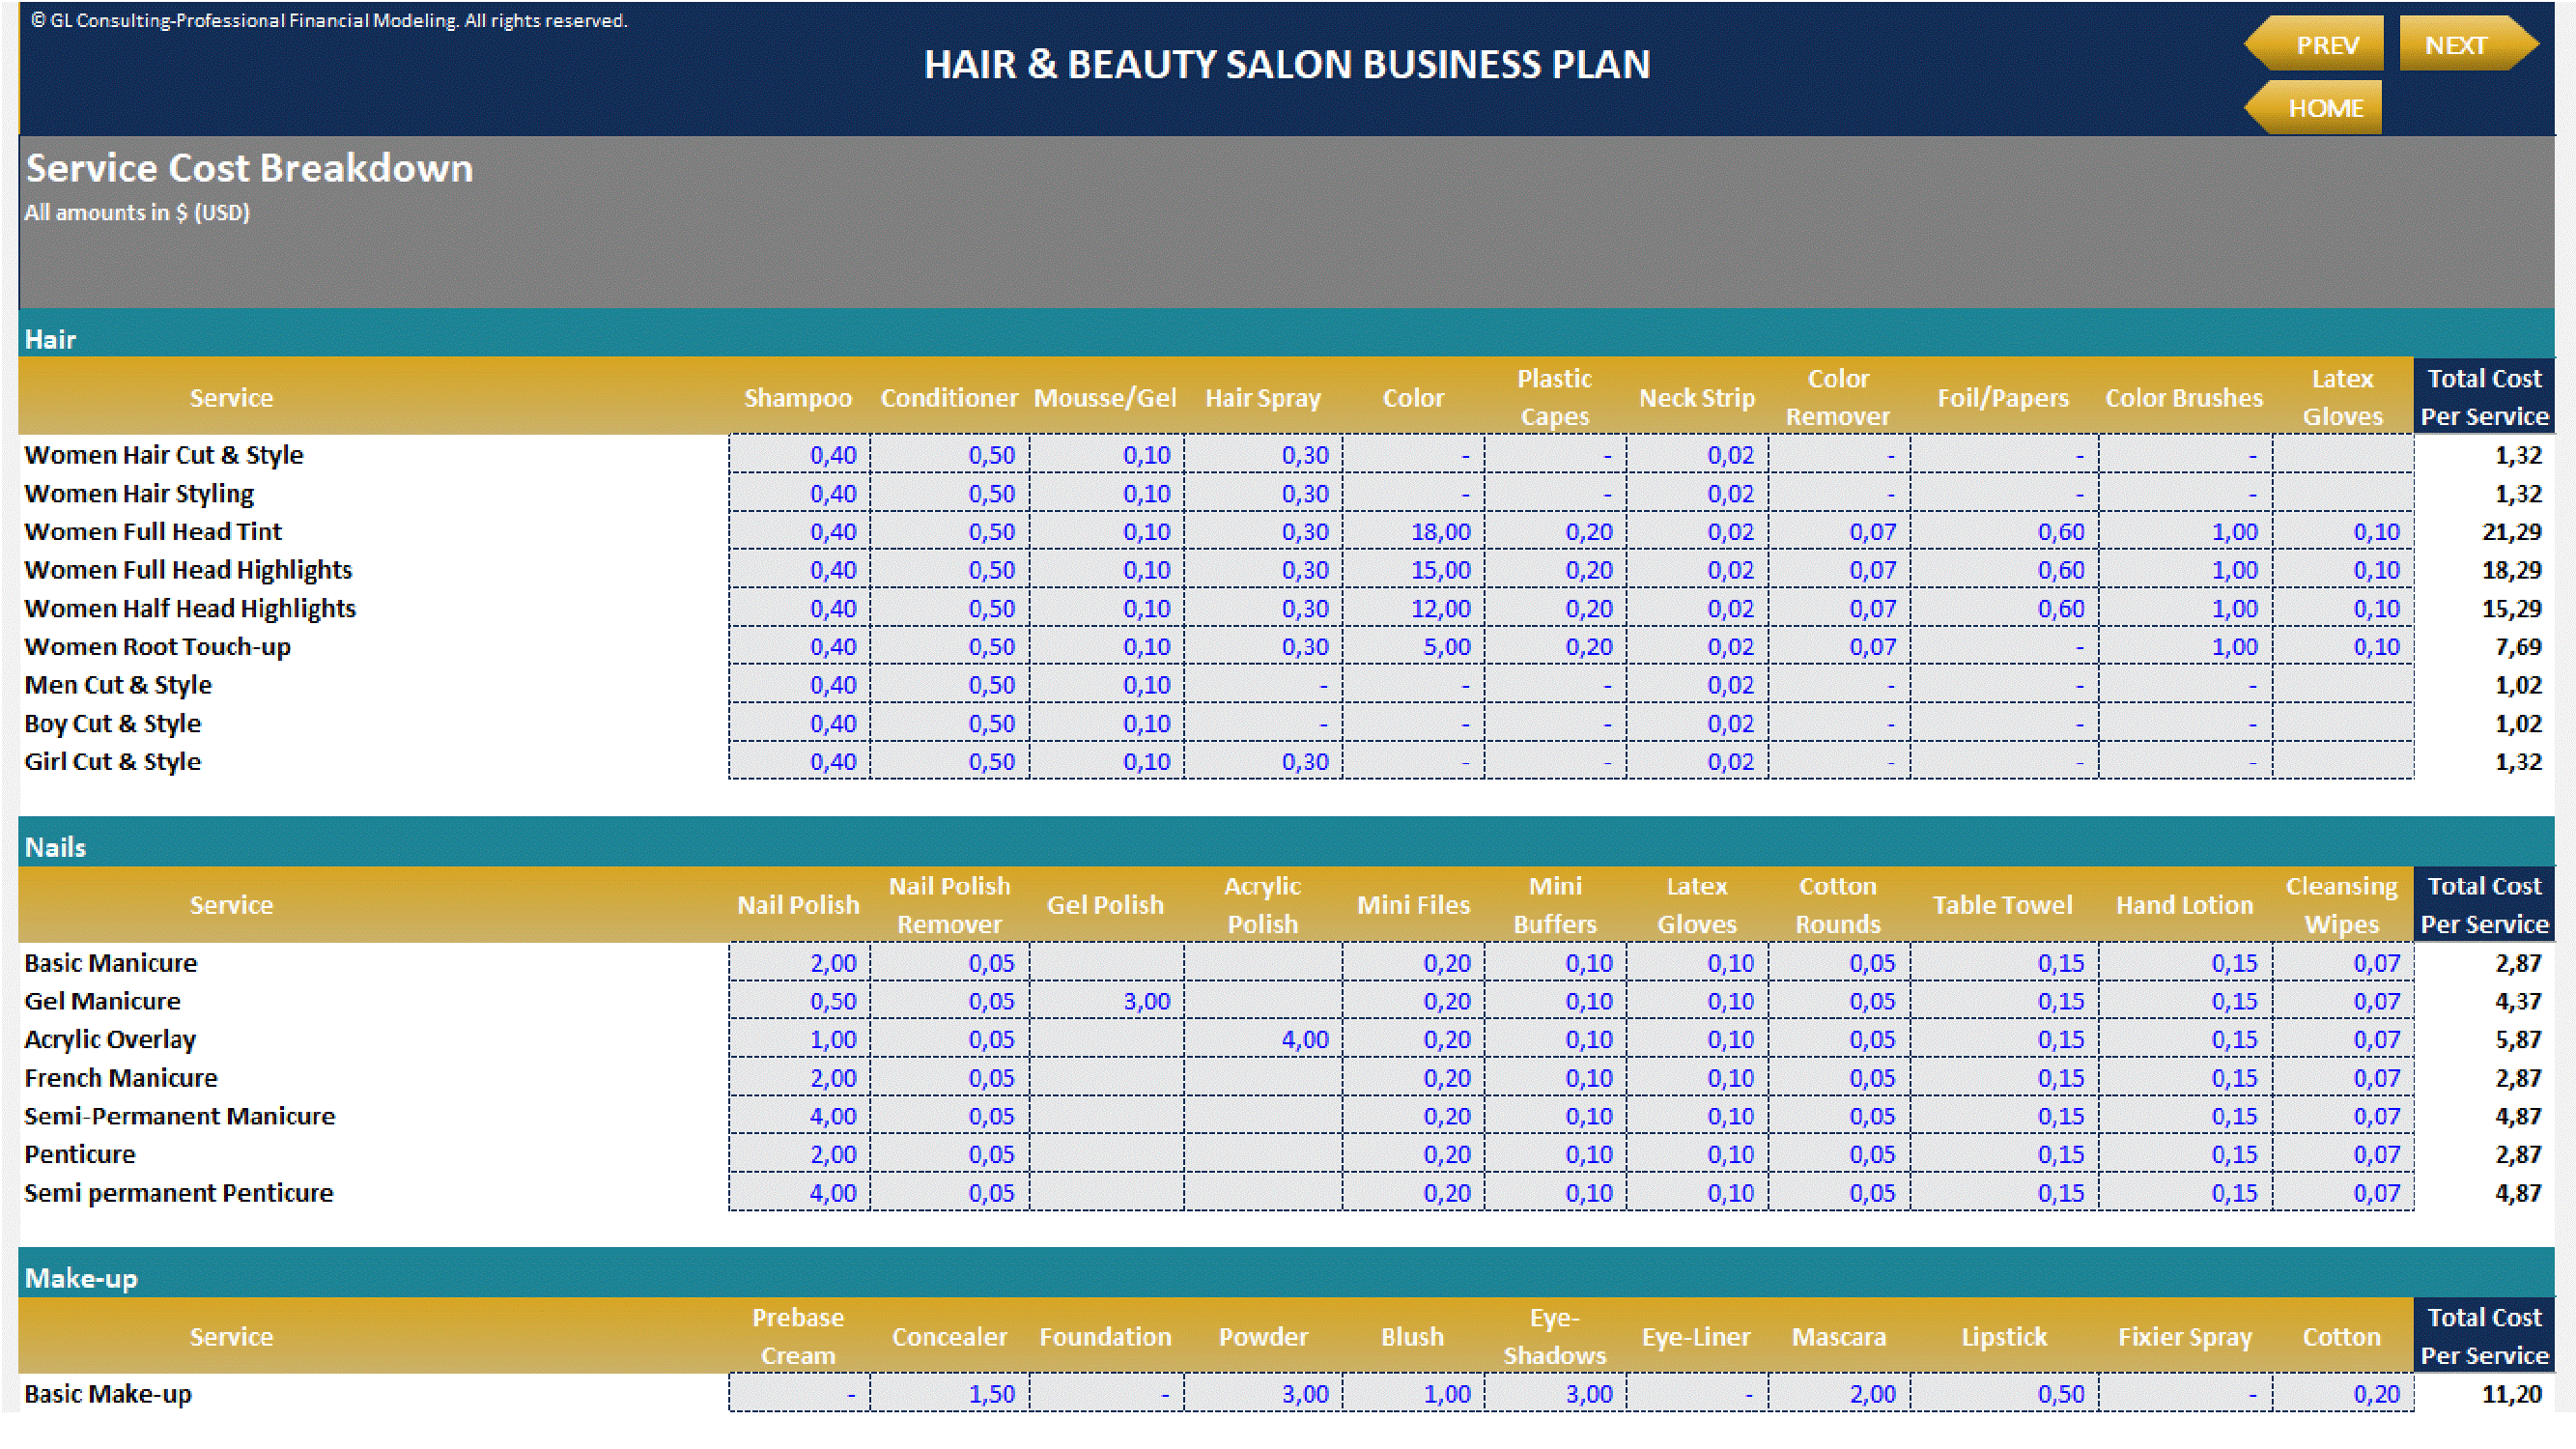 This is a partial preview of Hair & Beauty Salon Business Plan - 5-Year Financial Projection (Excel workbook (XLSX)). 